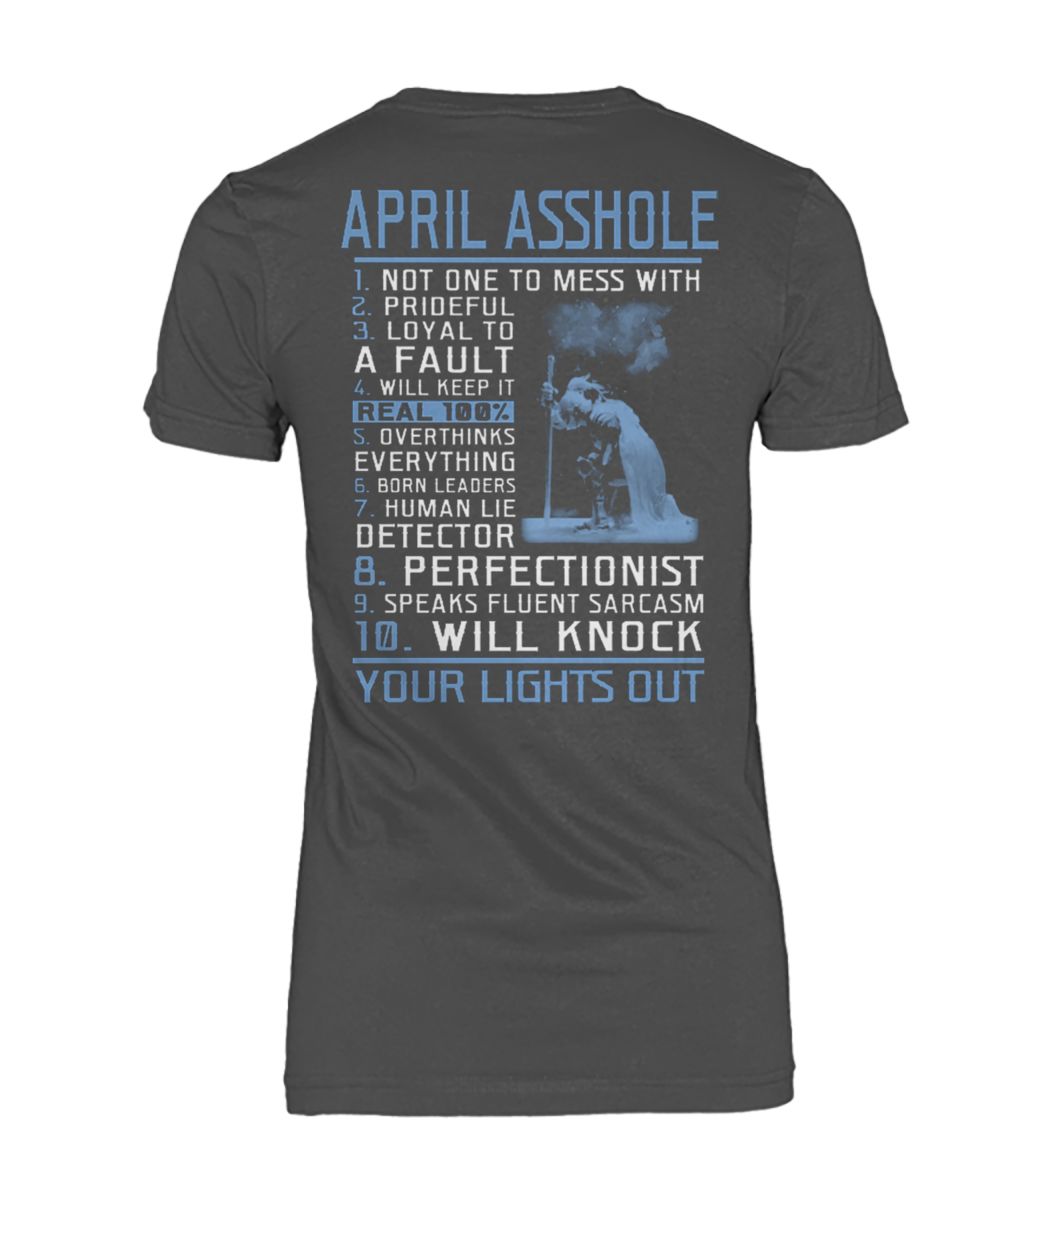 April asshole not one to mess with your light out women's crew tee